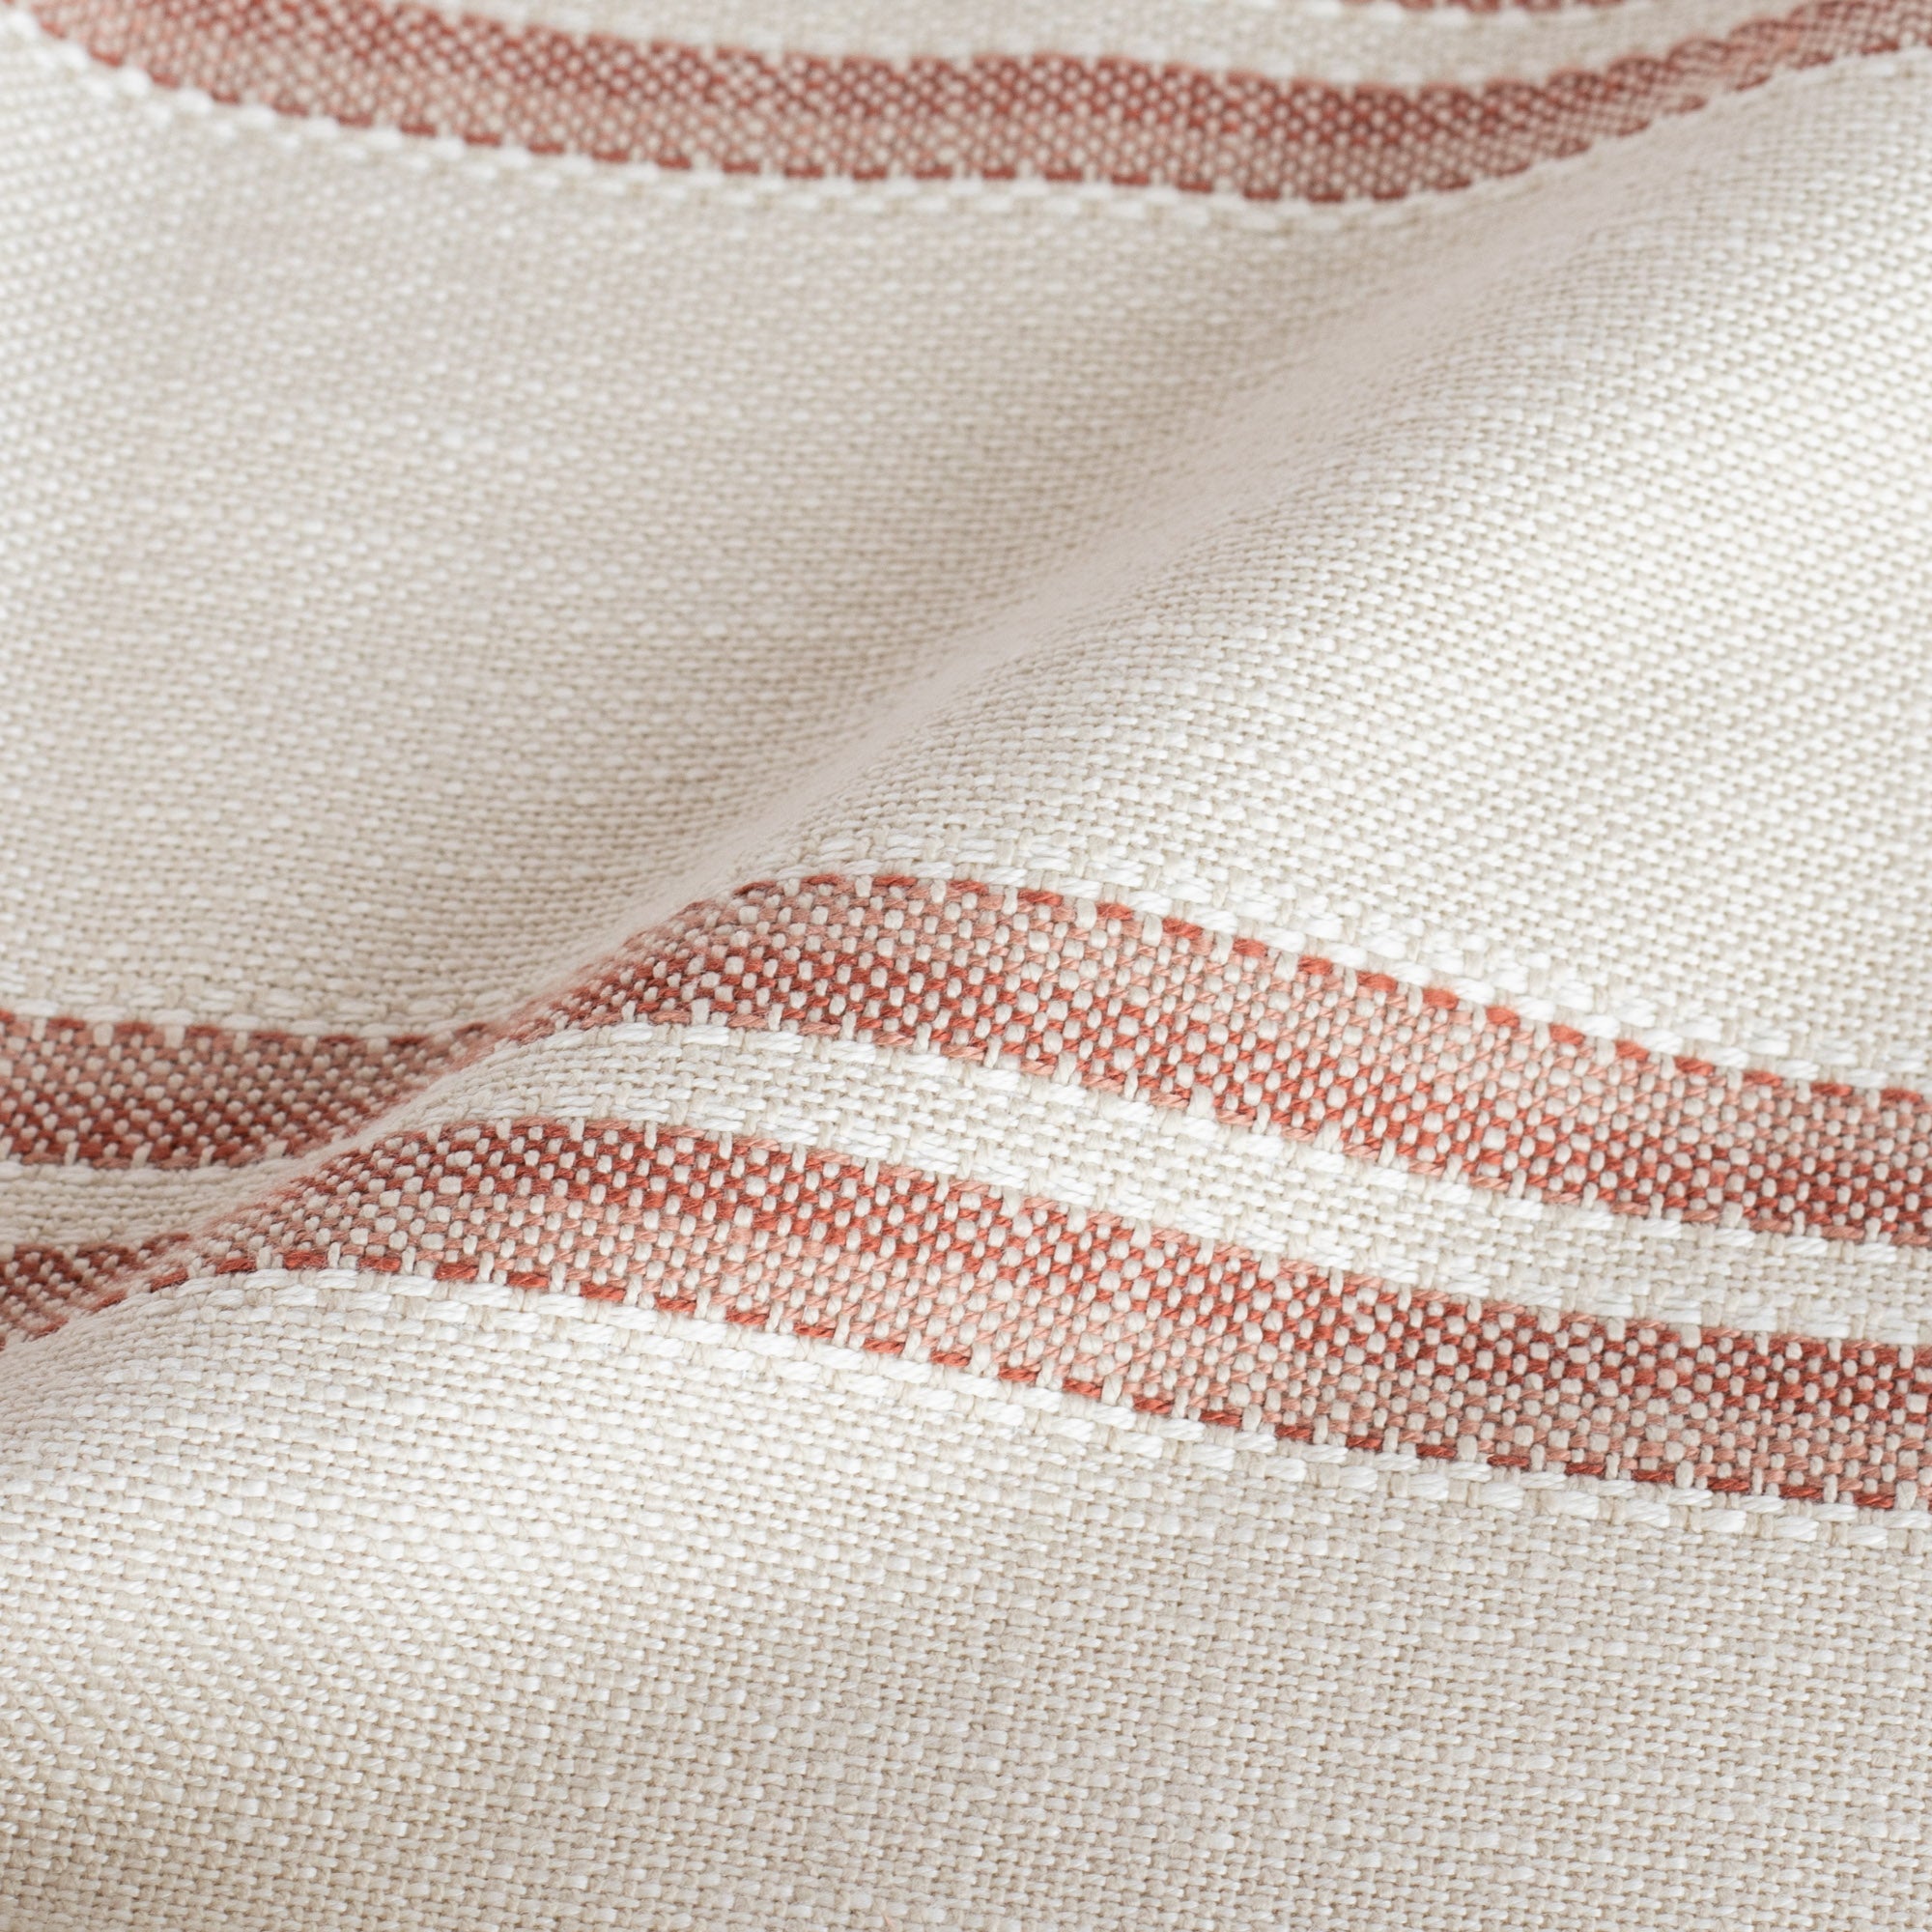 a sandy taupe and clay red striped indoor outdoor Inside Out fabric : close up view